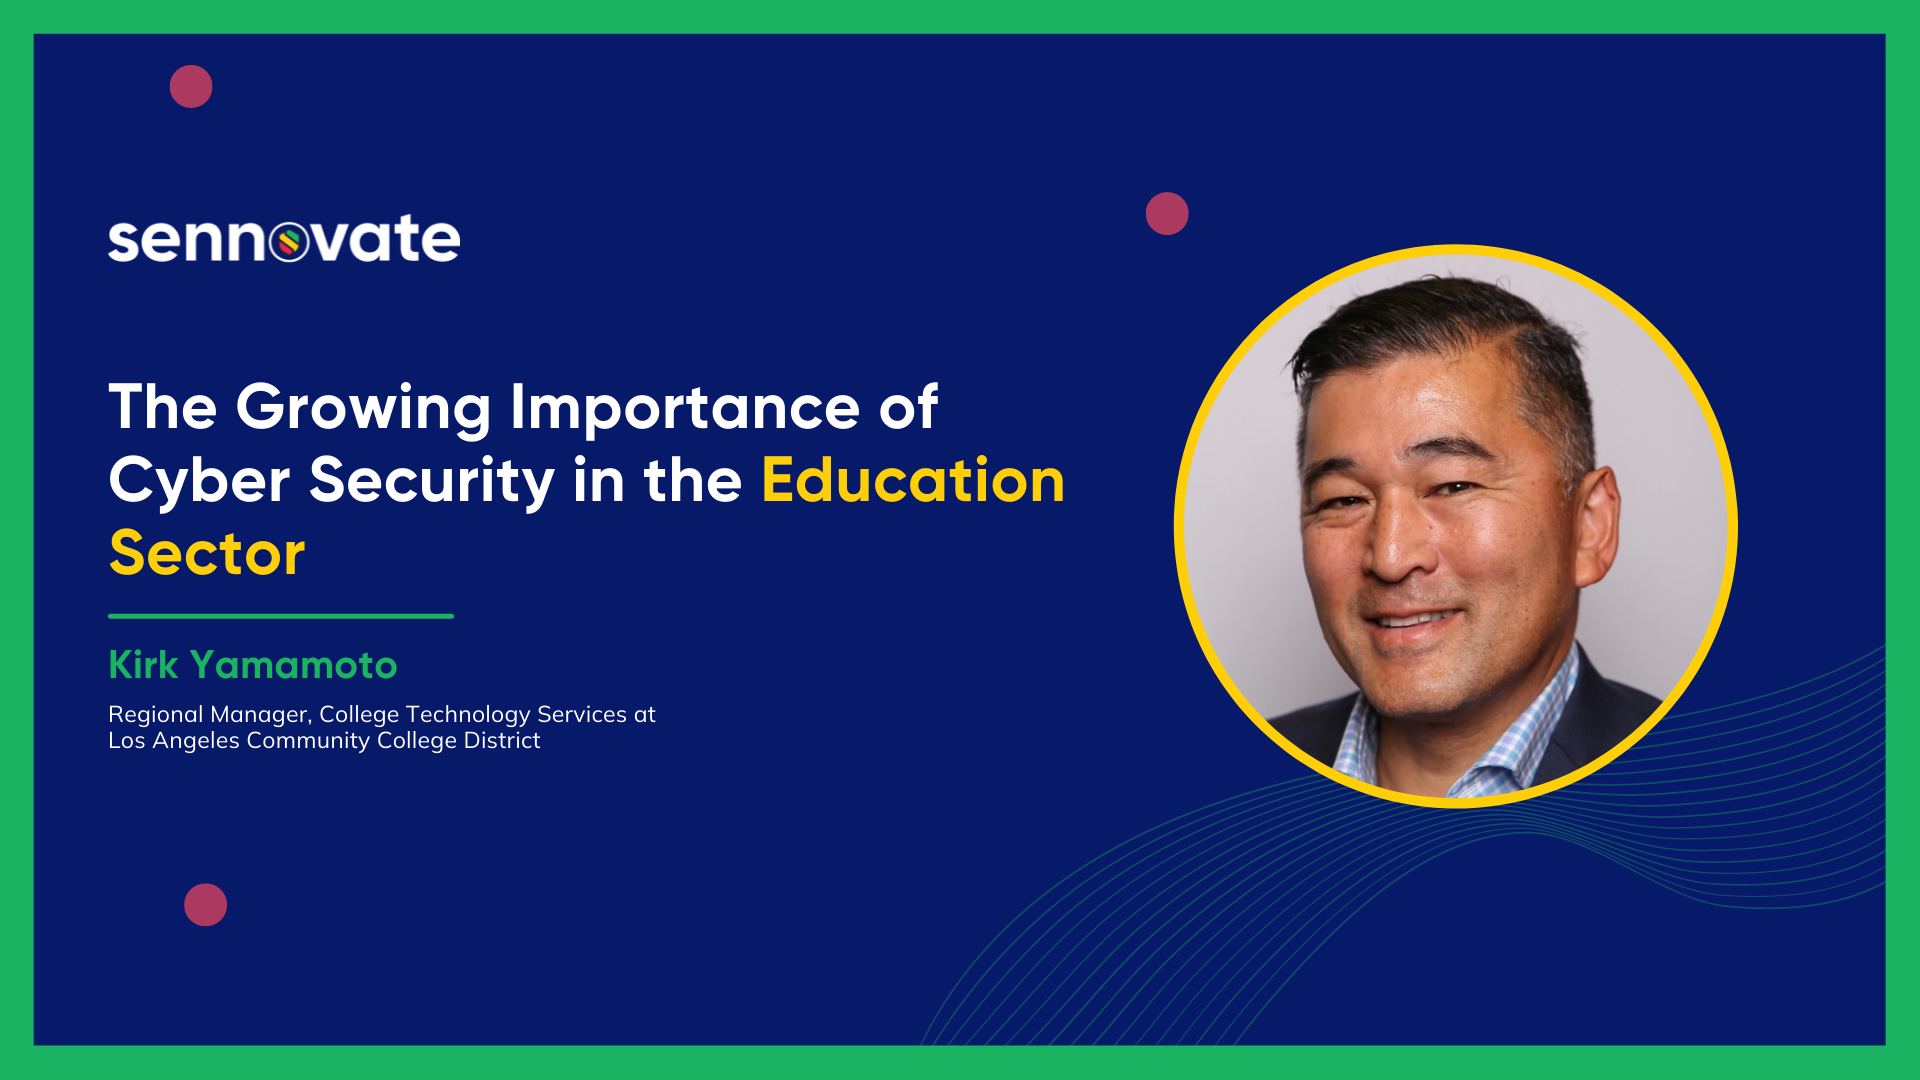 The Growing Importance of cyber security in the education sector- Kirk Yamamoto